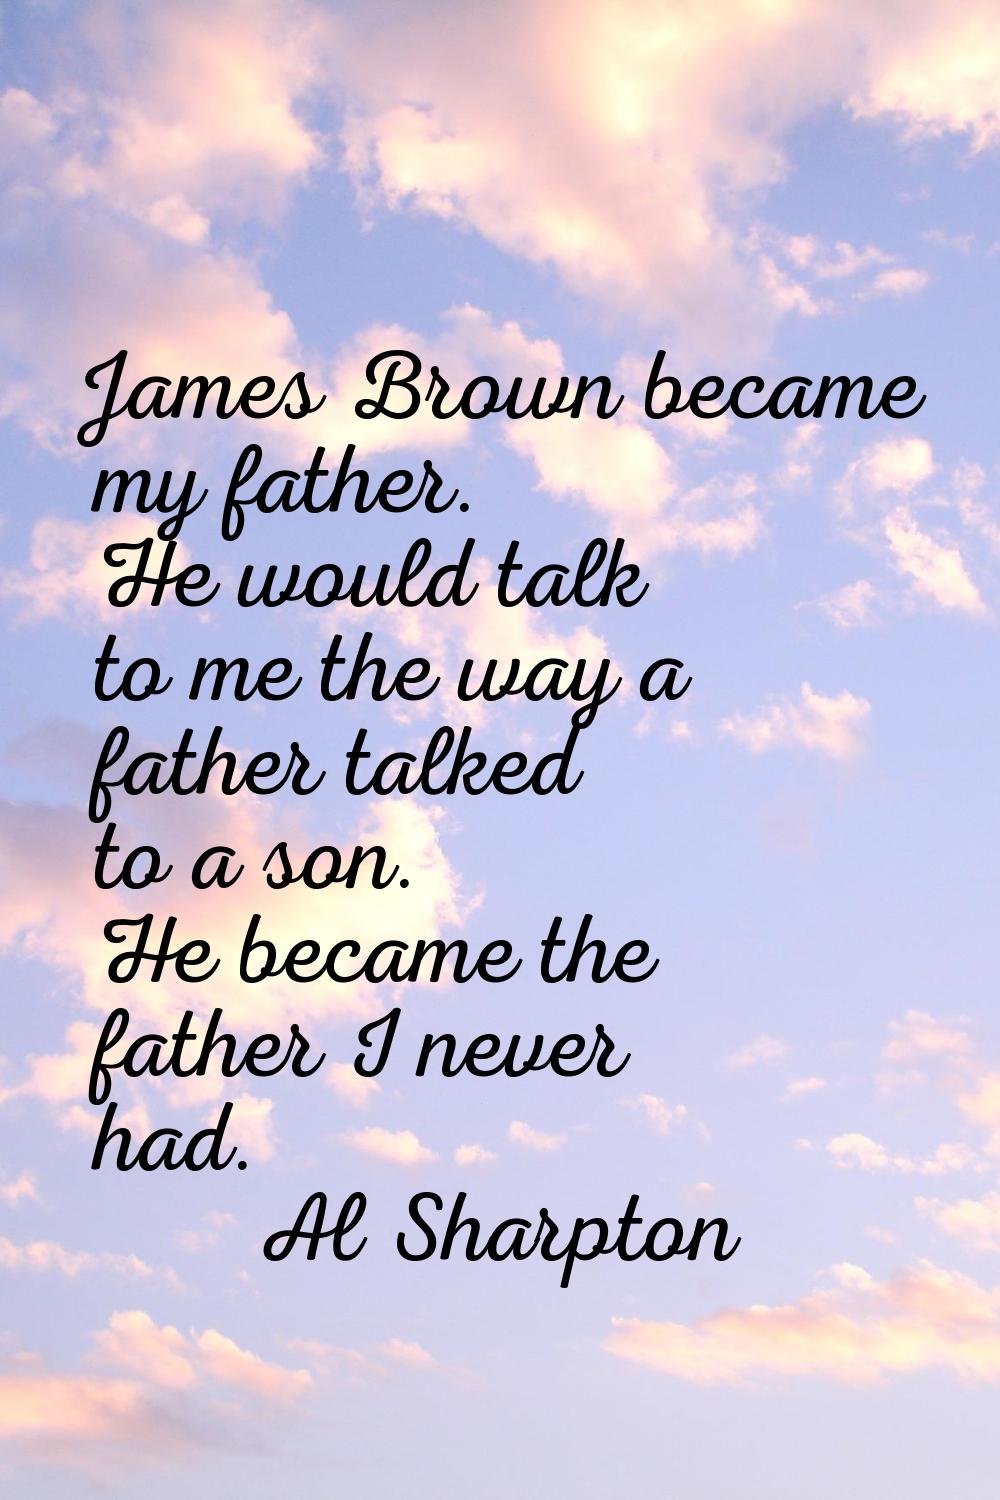 James Brown became my father. He would talk to me the way a father talked to a son. He became the f